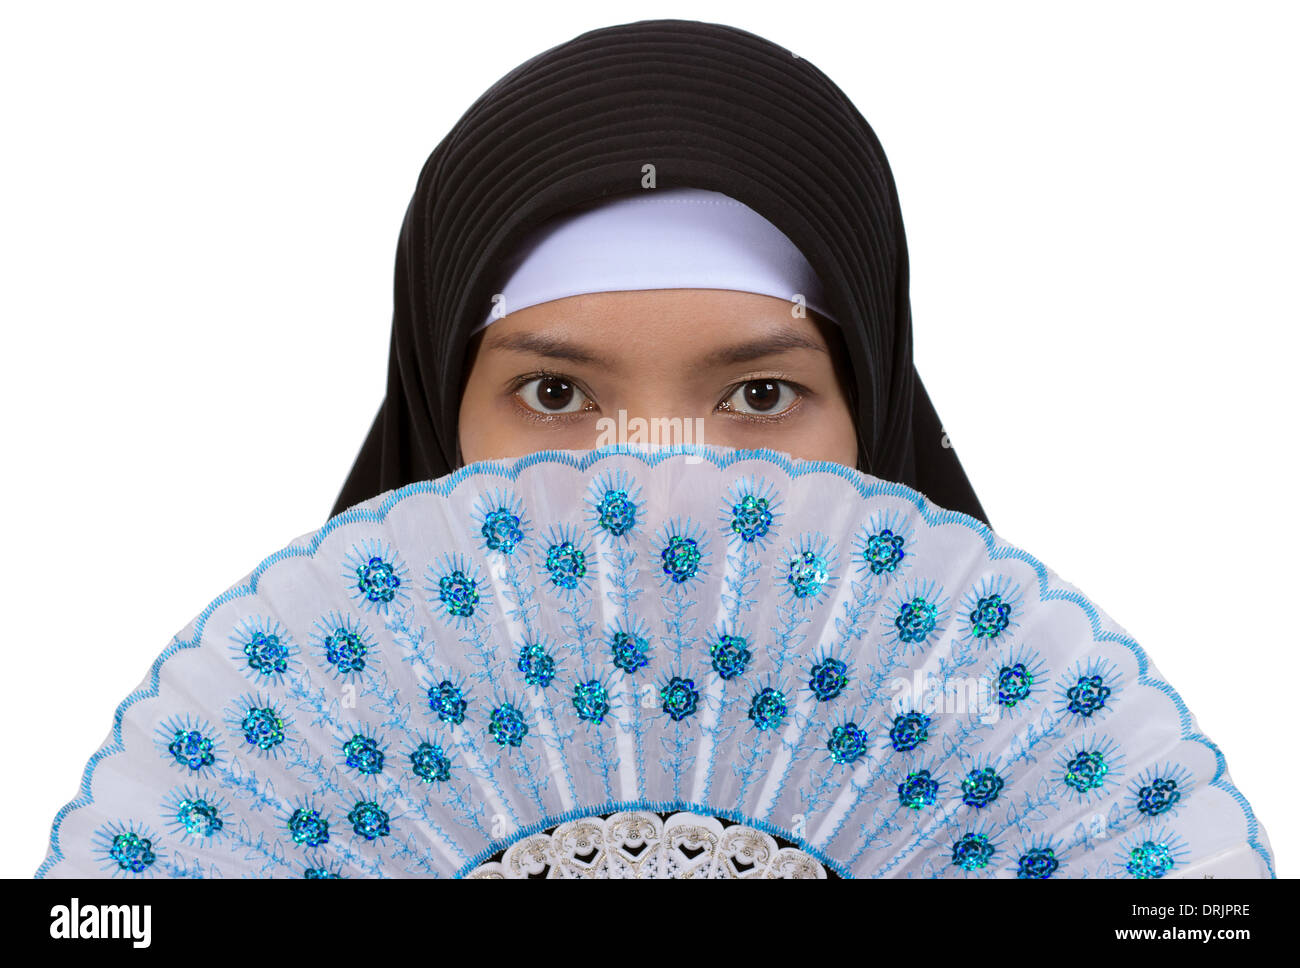 Portrait of a young Muslim woman Stock Photo